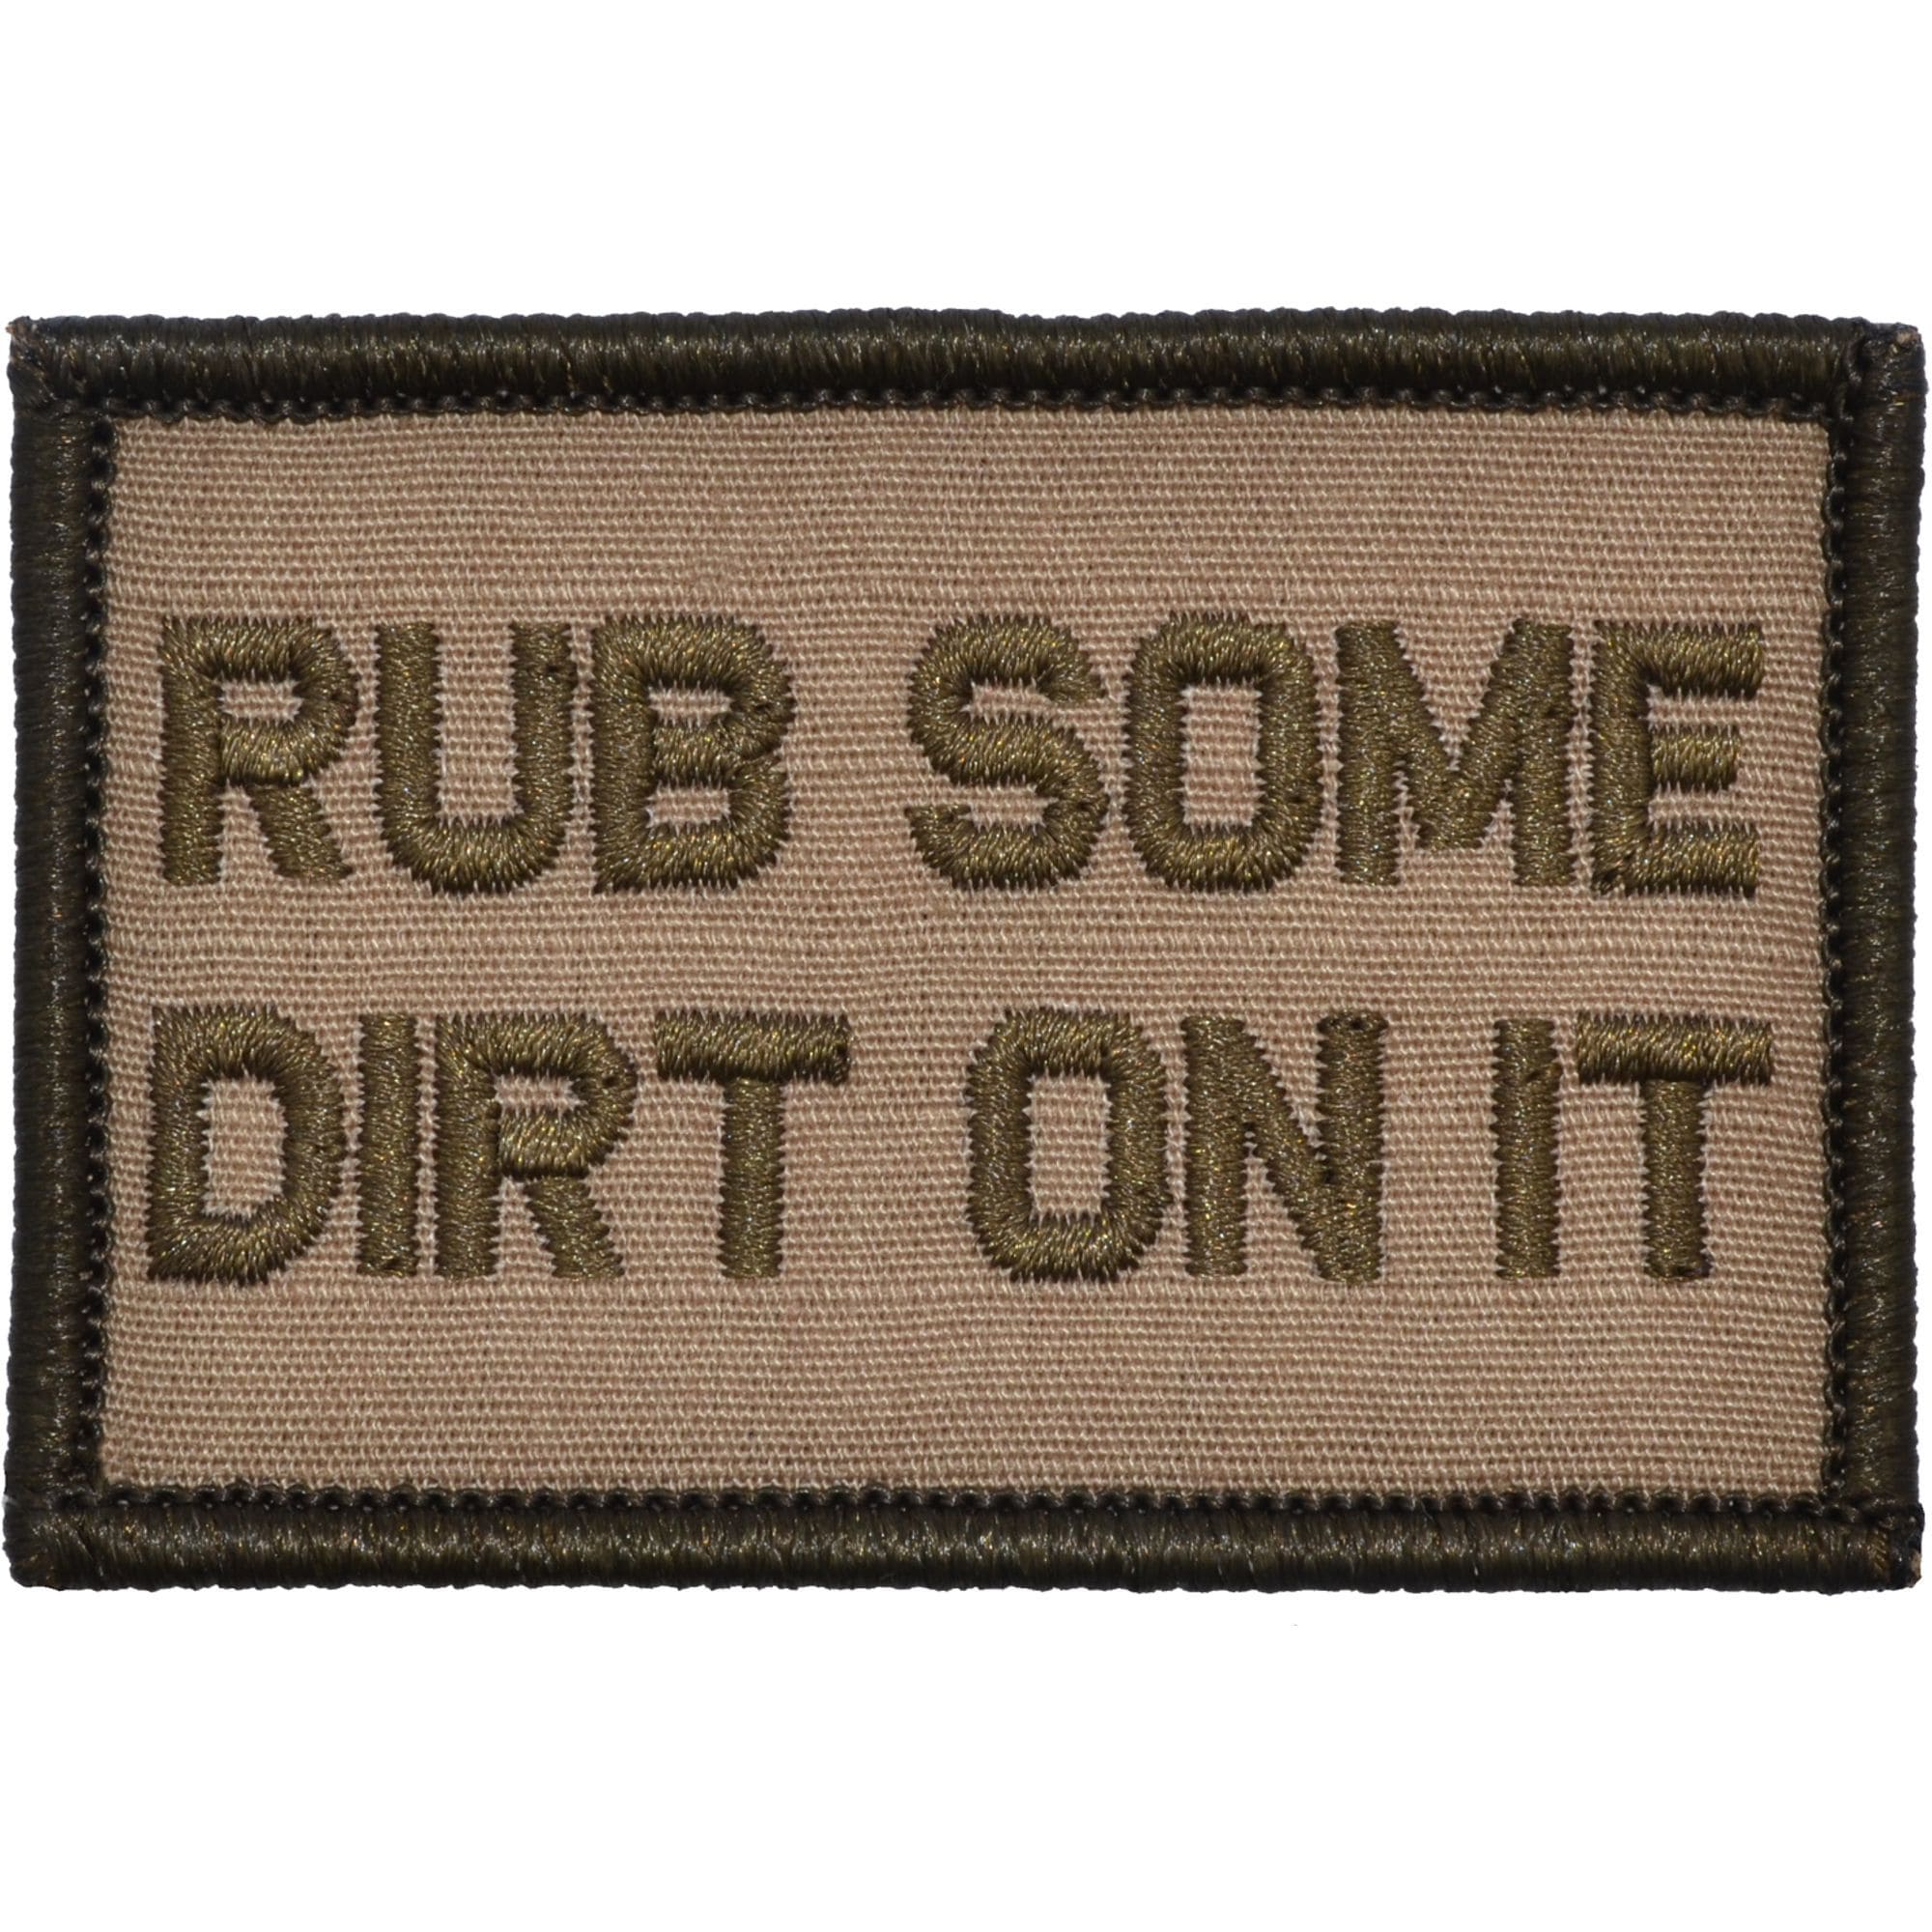 Tactical Gear Junkie Patches Coyote Brown Rub Some Dirt On It - 2x3 Patch